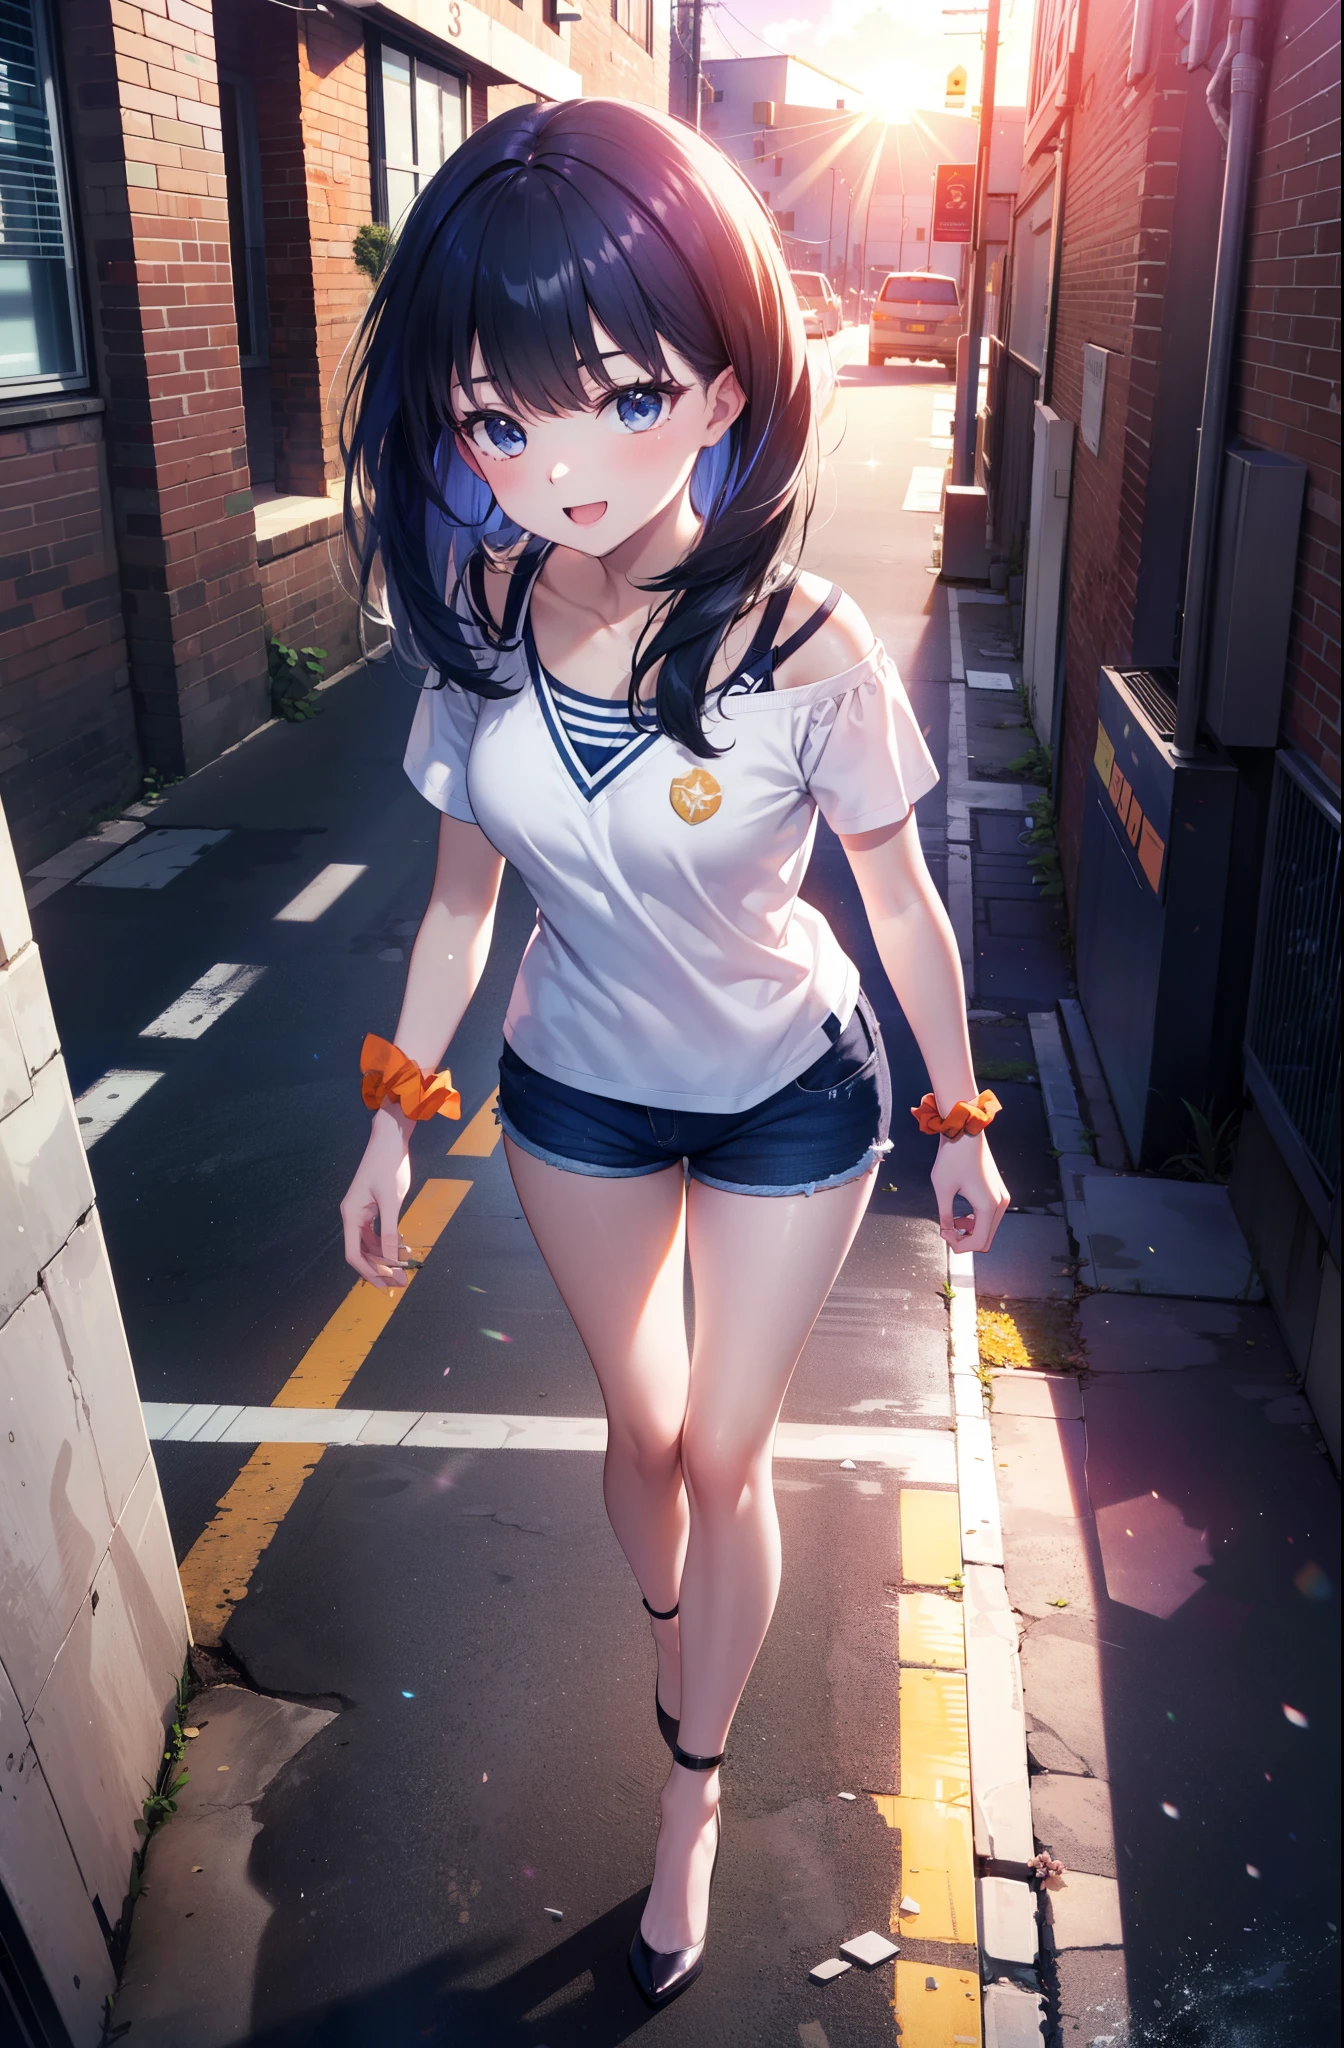 Rikka body, rikka takarada, Black Hair, blue eyes, Long Hair, orange Scrunchie, Scrunchie, wrist Scrunchie,happy smile, smile, Open your mouth,Cold shoulder tops,Short sleeve,Shorts,Stiletto heels,Walking,morning,morning陽,The sun is rising,So that the whole body goes into the illustration,Looking down from above,
Destroy outdoors, In town,Building district,
壊す looking at viewer, Systemic
break (masterpiece:1.2), highest quality, High resolution, unity 8k wallpaper, (figure:0.8), (Beautiful fine details:1.6), Highly detailed face, Perfect lighting, Highly detailed CG, (Perfect hands, Perfect Anatomy),